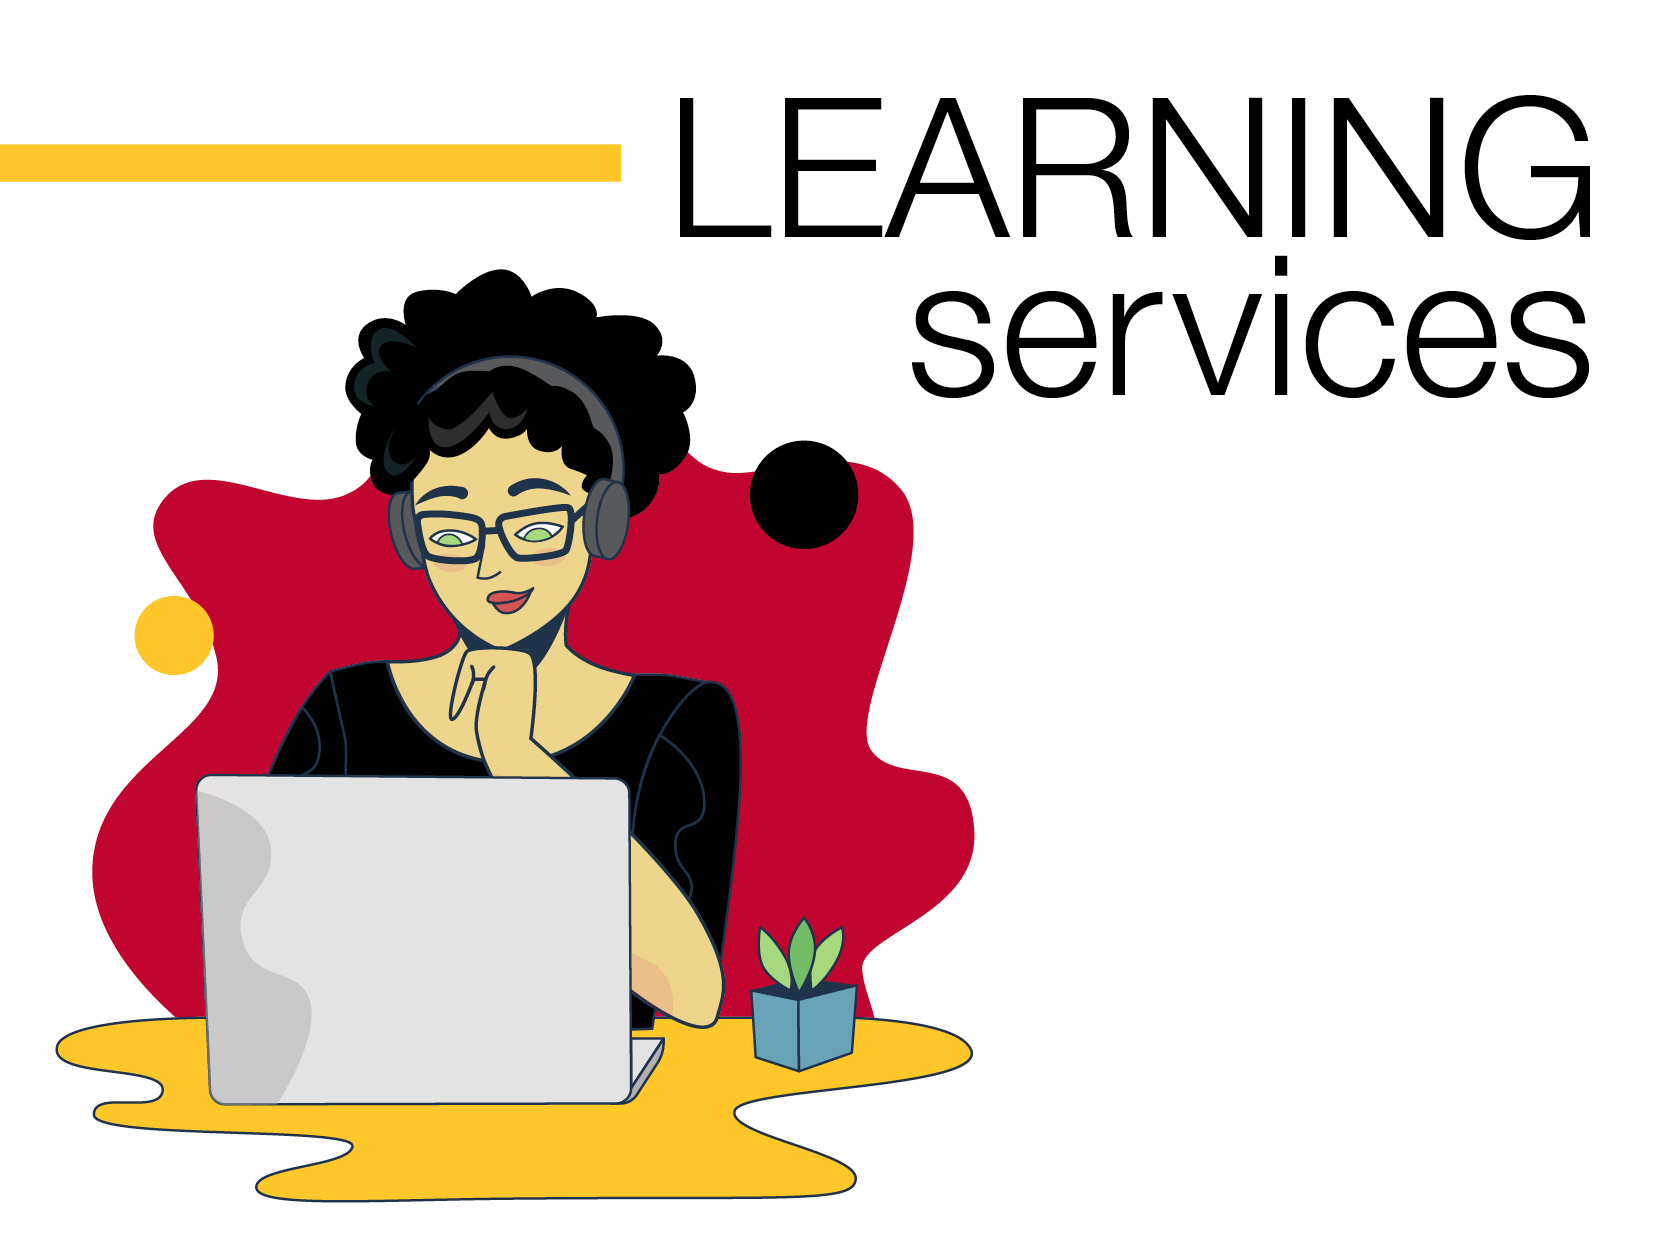 Photo of a person sitting in front of a laptop. The text reads, "LEARNING services."